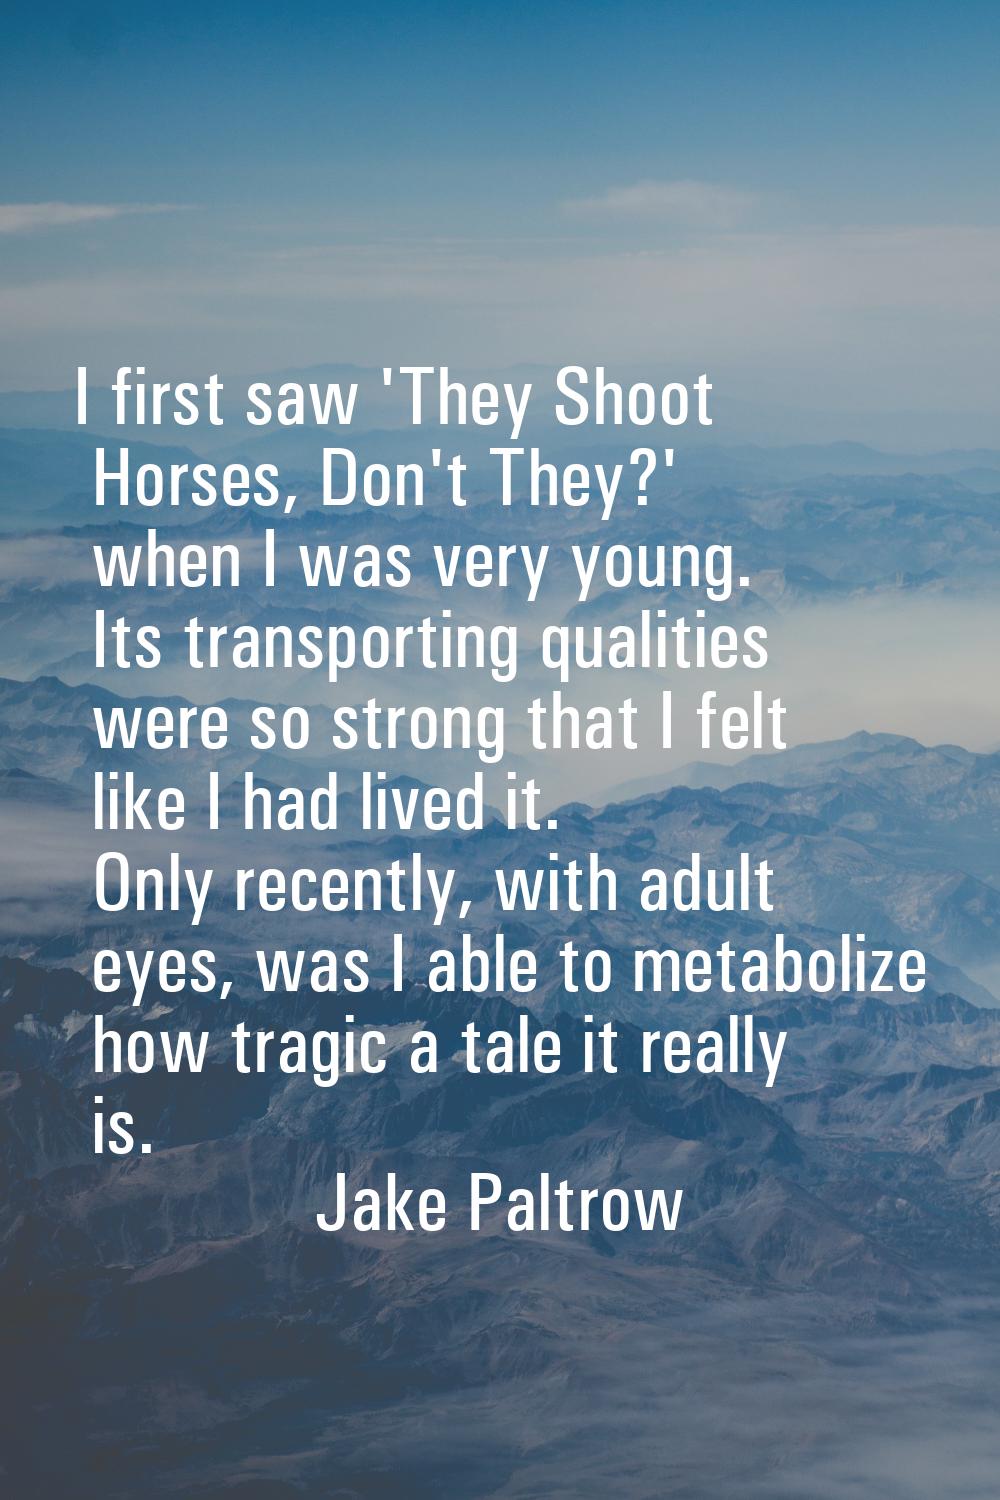 I first saw 'They Shoot Horses, Don't They?' when I was very young. Its transporting qualities were